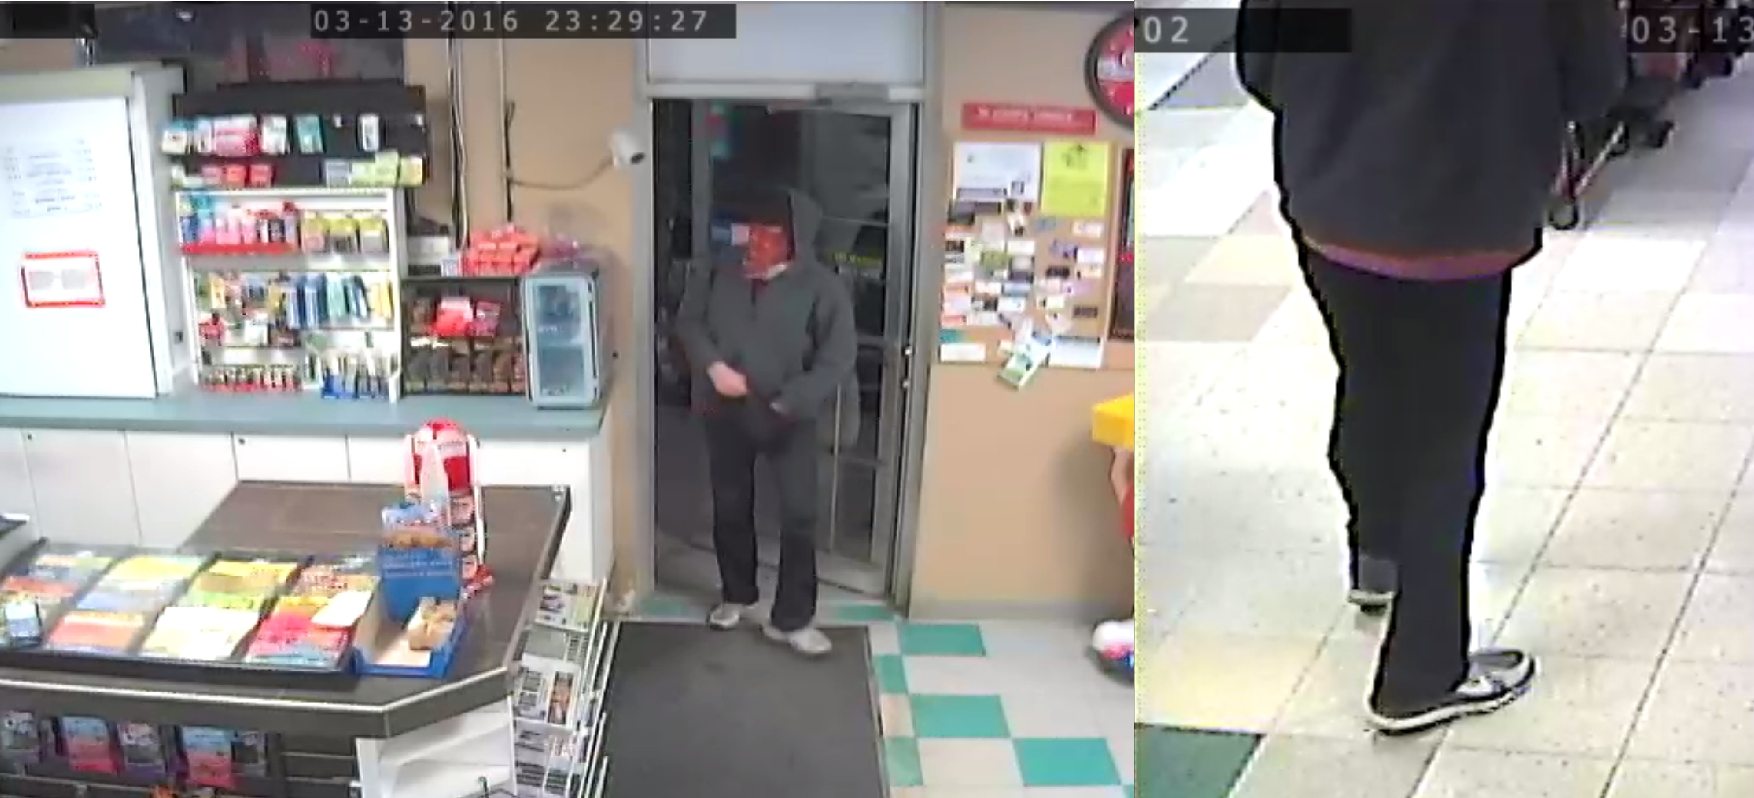 Attempted armed robbery at East Star Convenience Store